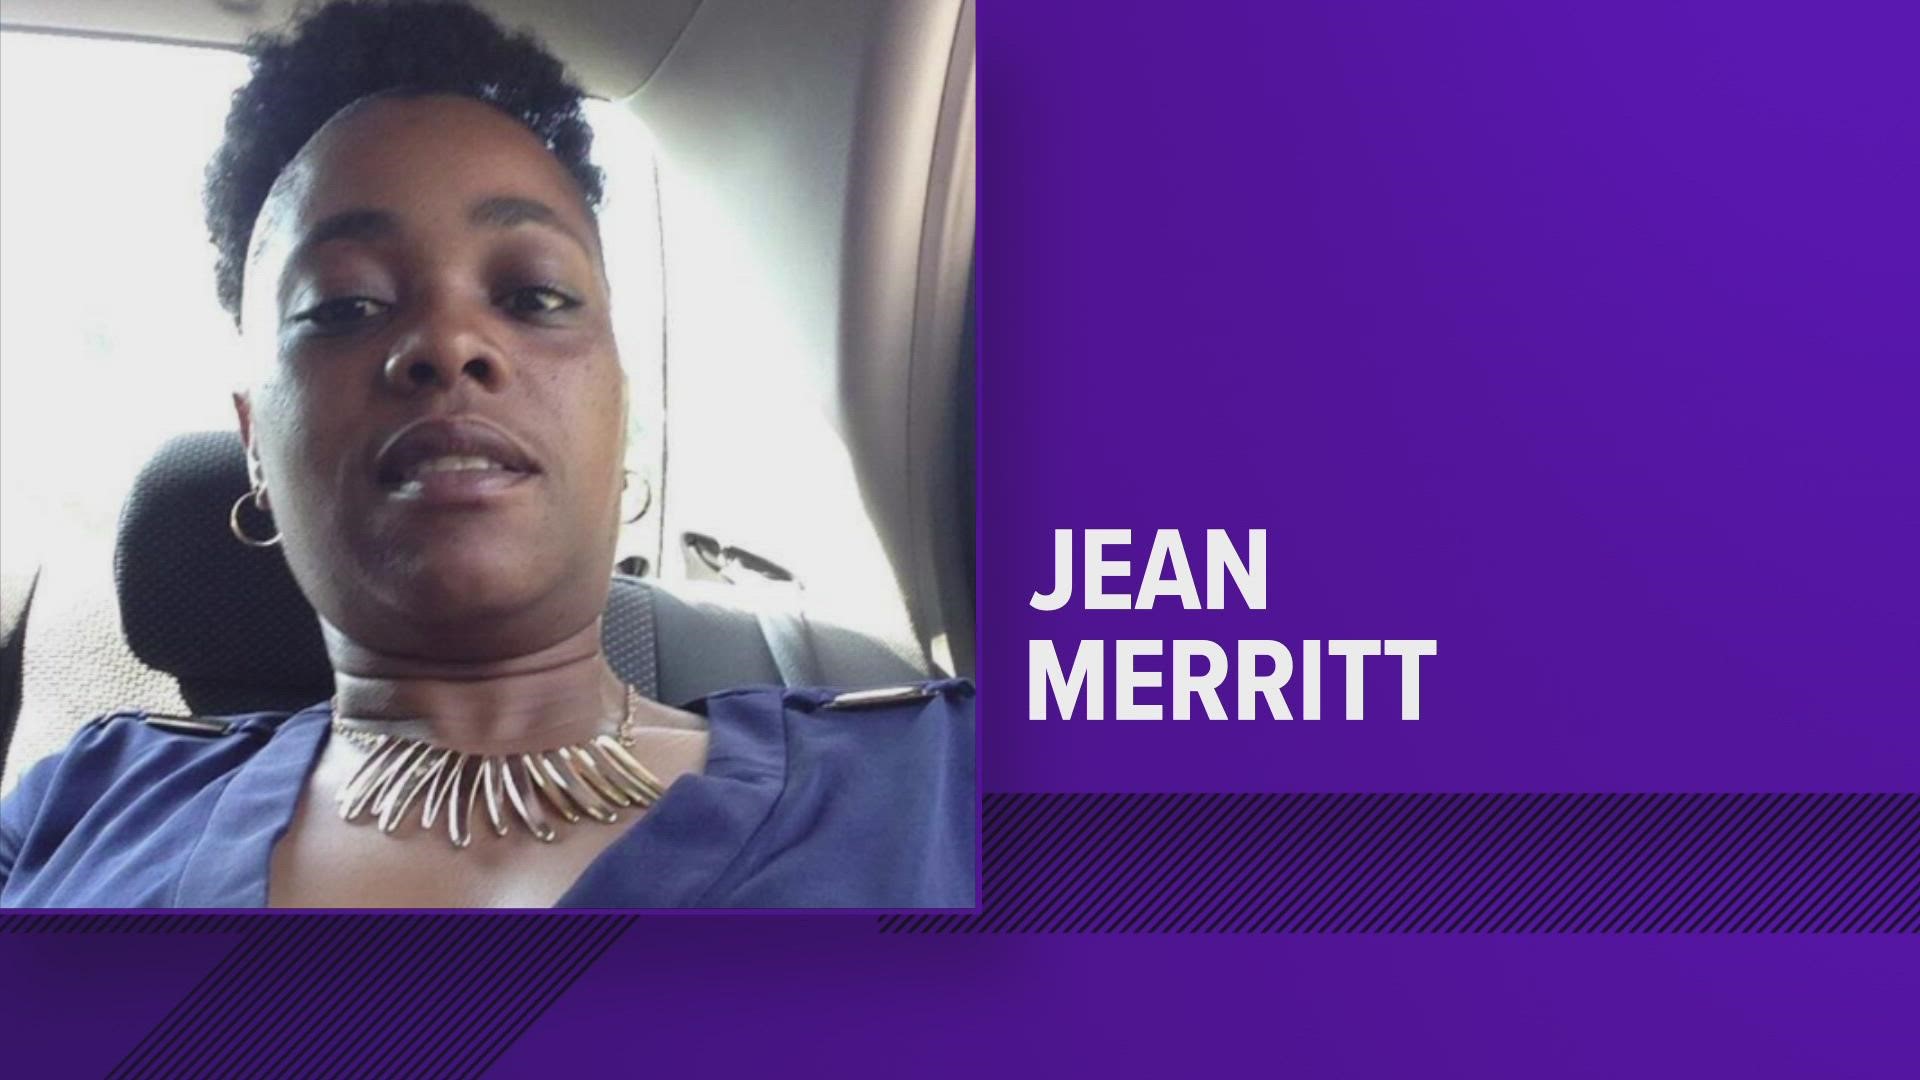 Jean Merritt is 5 feet and 3 inches tall, and she weighs 140 pounds. She was last seen wearing a Grey Sweatshirt with black and white checkerboard pants.